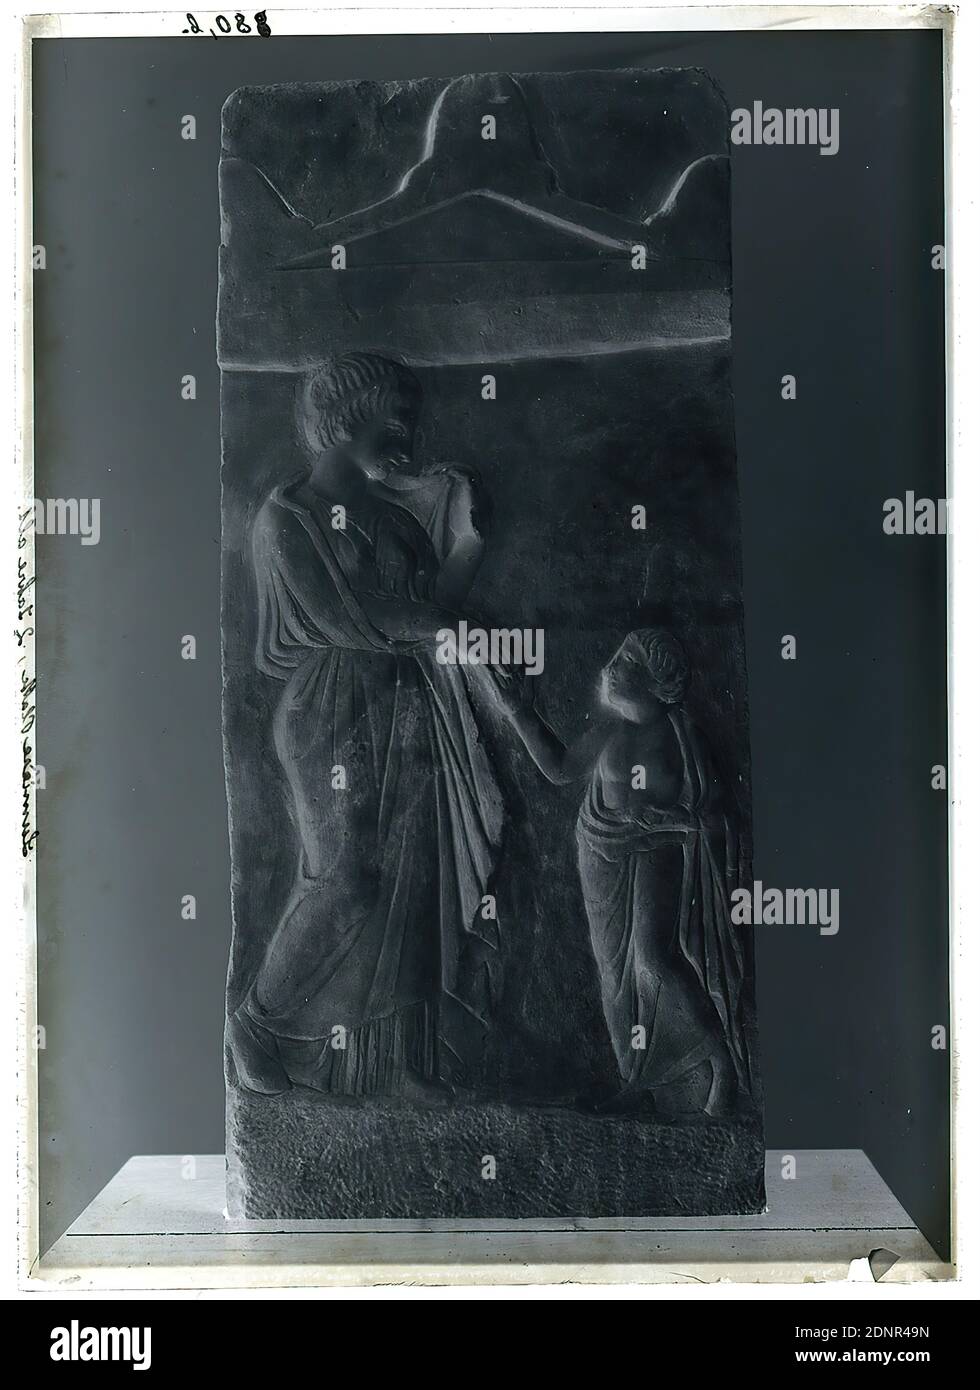 Wilhelm Weimar, grave relief Girl extends her hand to a boy, glass negative, black and white negative process, total: height: 23.8 cm; width: 17.8 cm, numbered: top left: in black ink: 880,b, inscribed: left: in black ink: Lumiere plate, 2 years old, fact photography, work of applied art (marble), young woman, girl, arm positions, gestures, sculpture, sculpture, sculpture, sculpture, sculpture (collecting and exhibiting works of art), gravestone, gravestone slab Stock Photo